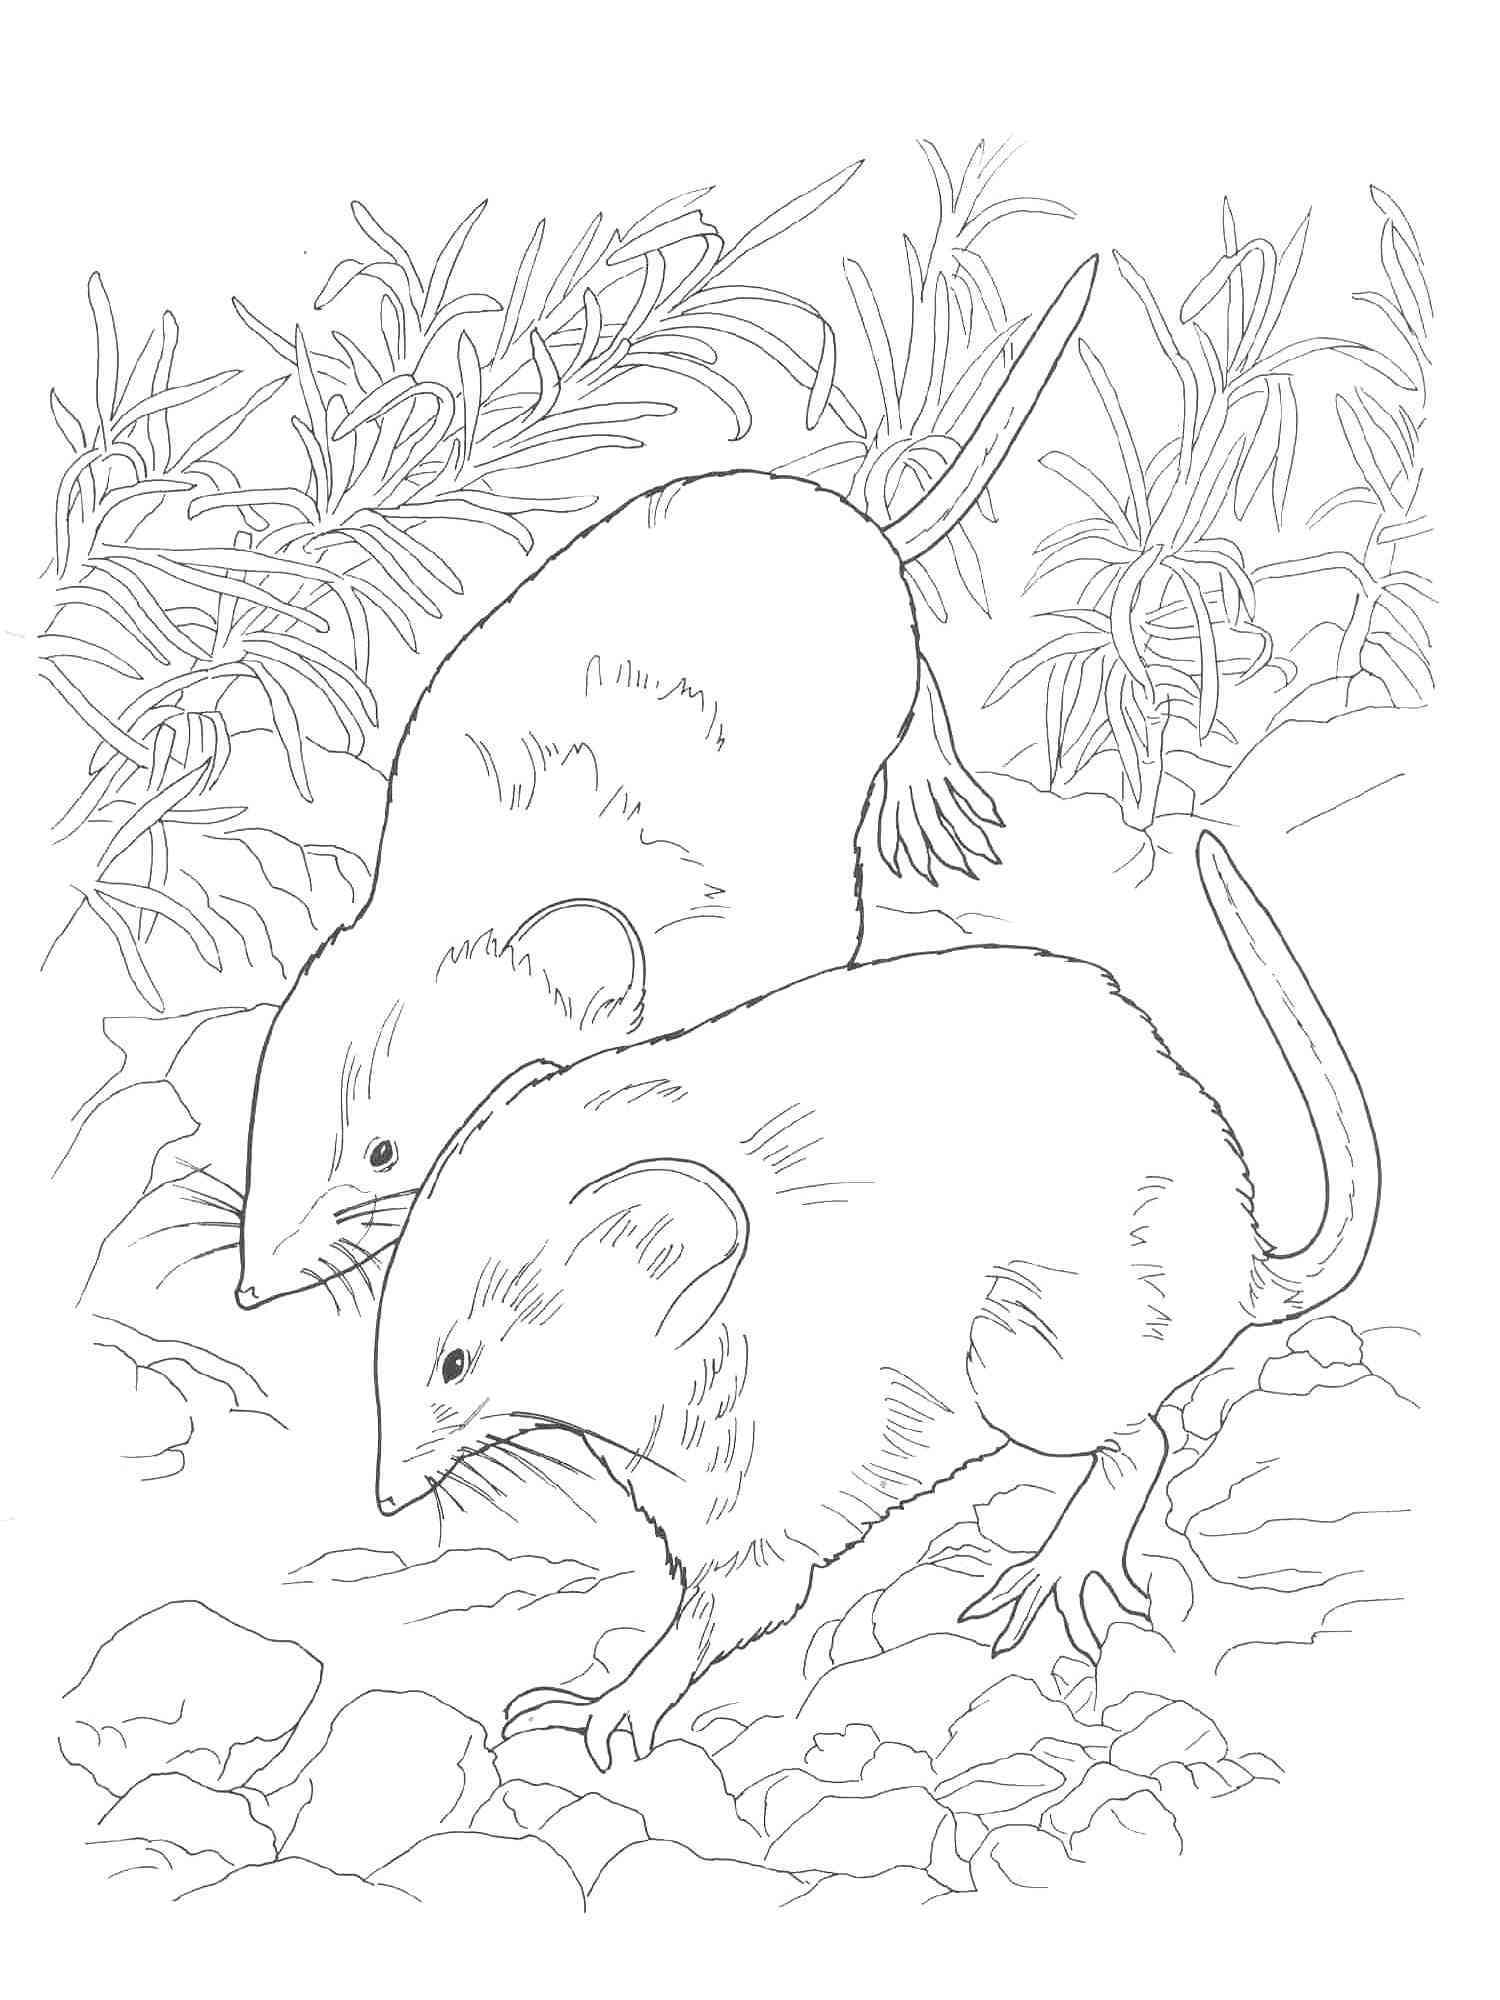 shrew-coloring-pages